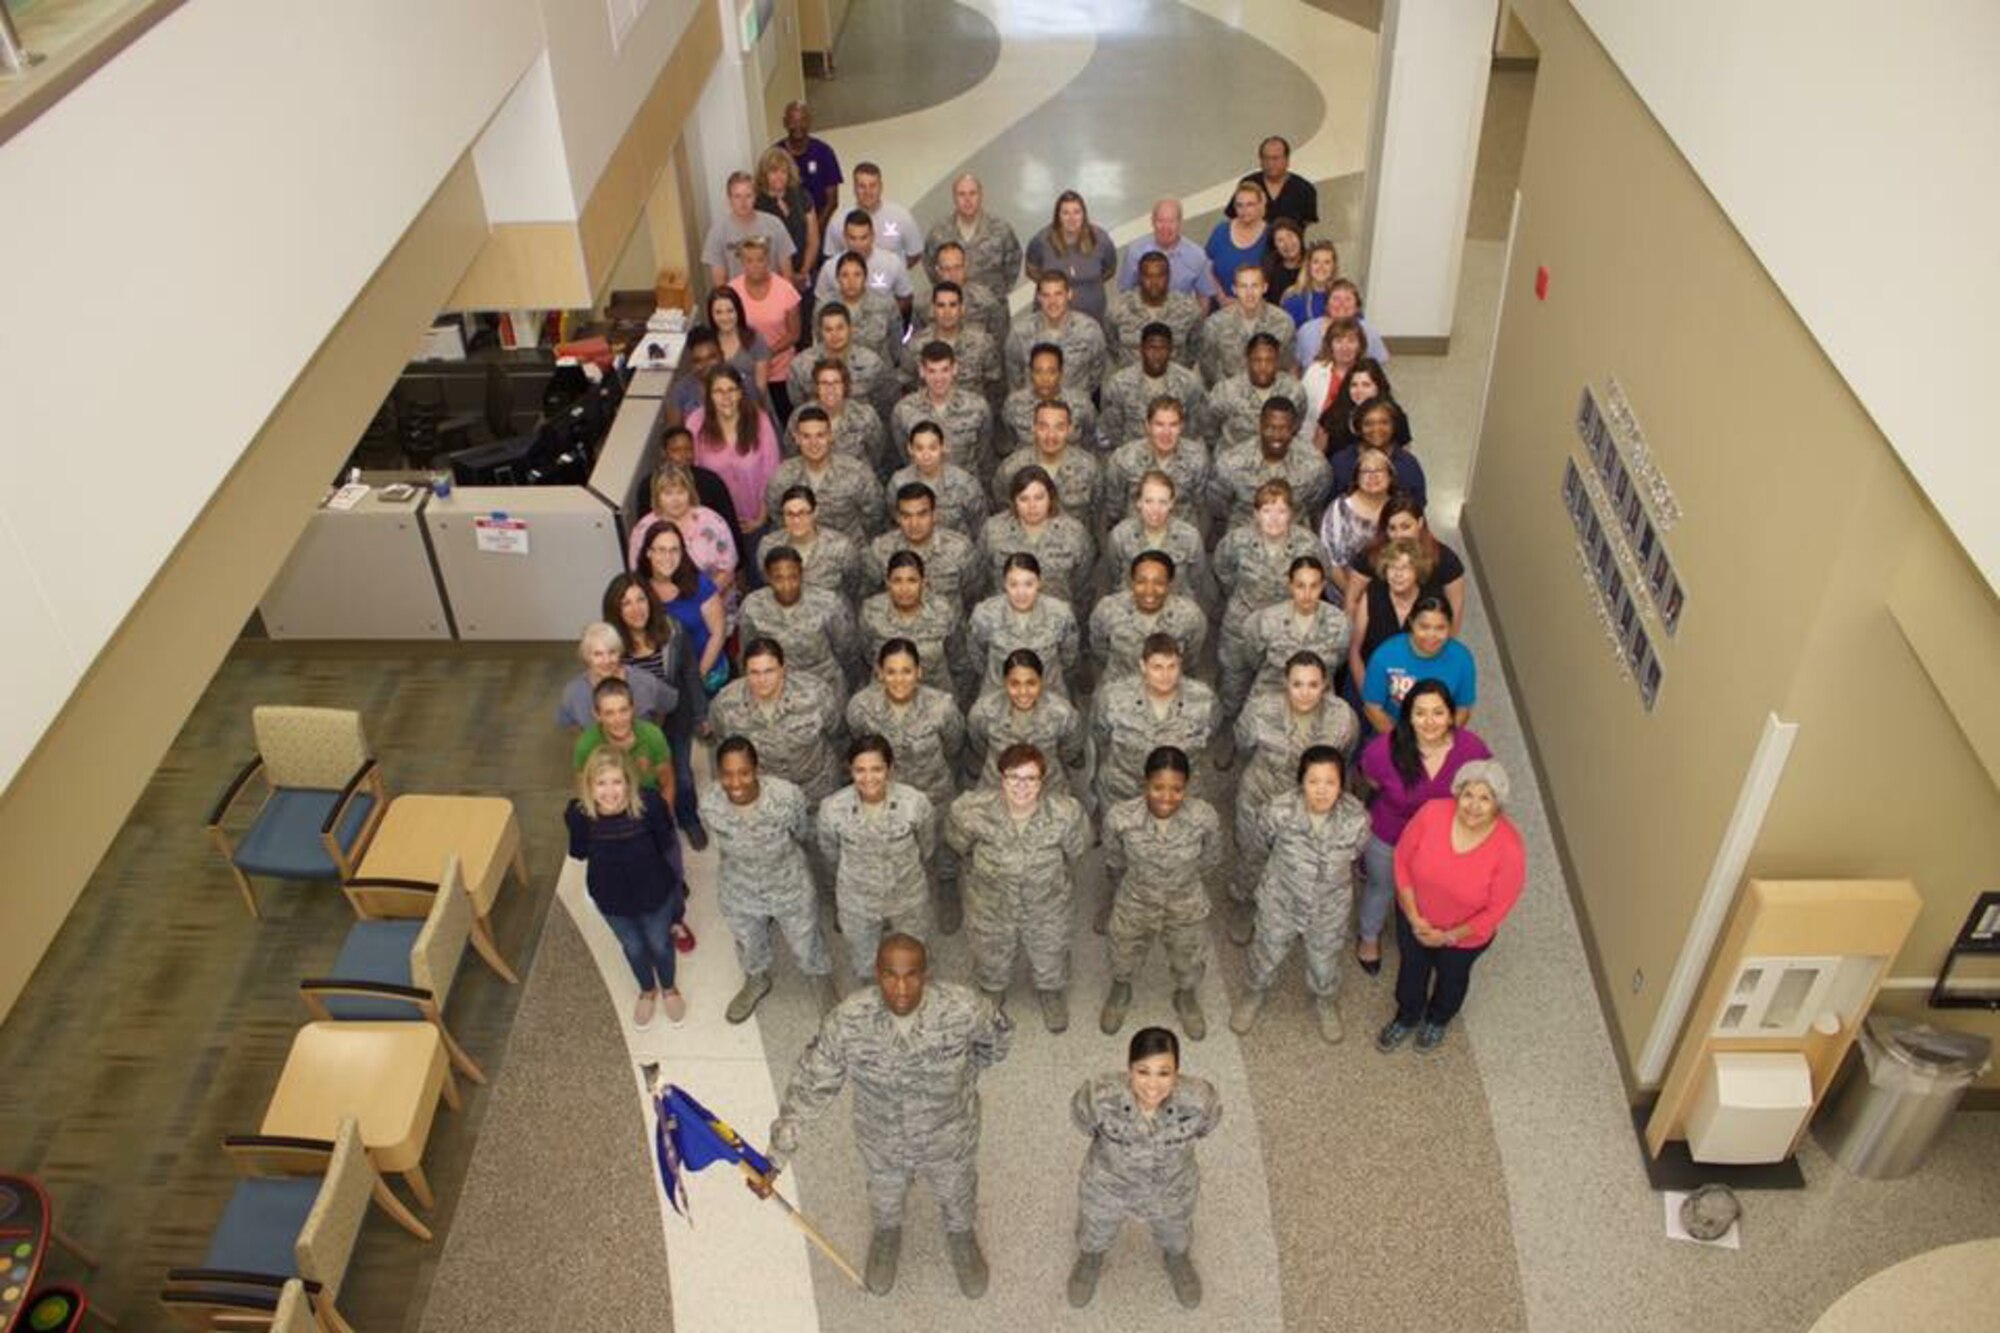 Lt. Col. Bonnie Stevenson (bottom right) is the 49th Medical Operations Squadron commander at Holloman Air Force Base, N.M. Stevenson uses International Women’s Day as a day to recognize the ways female leadership in the AFMS has impacted her medical and Air Force career. (Courtesy photo)